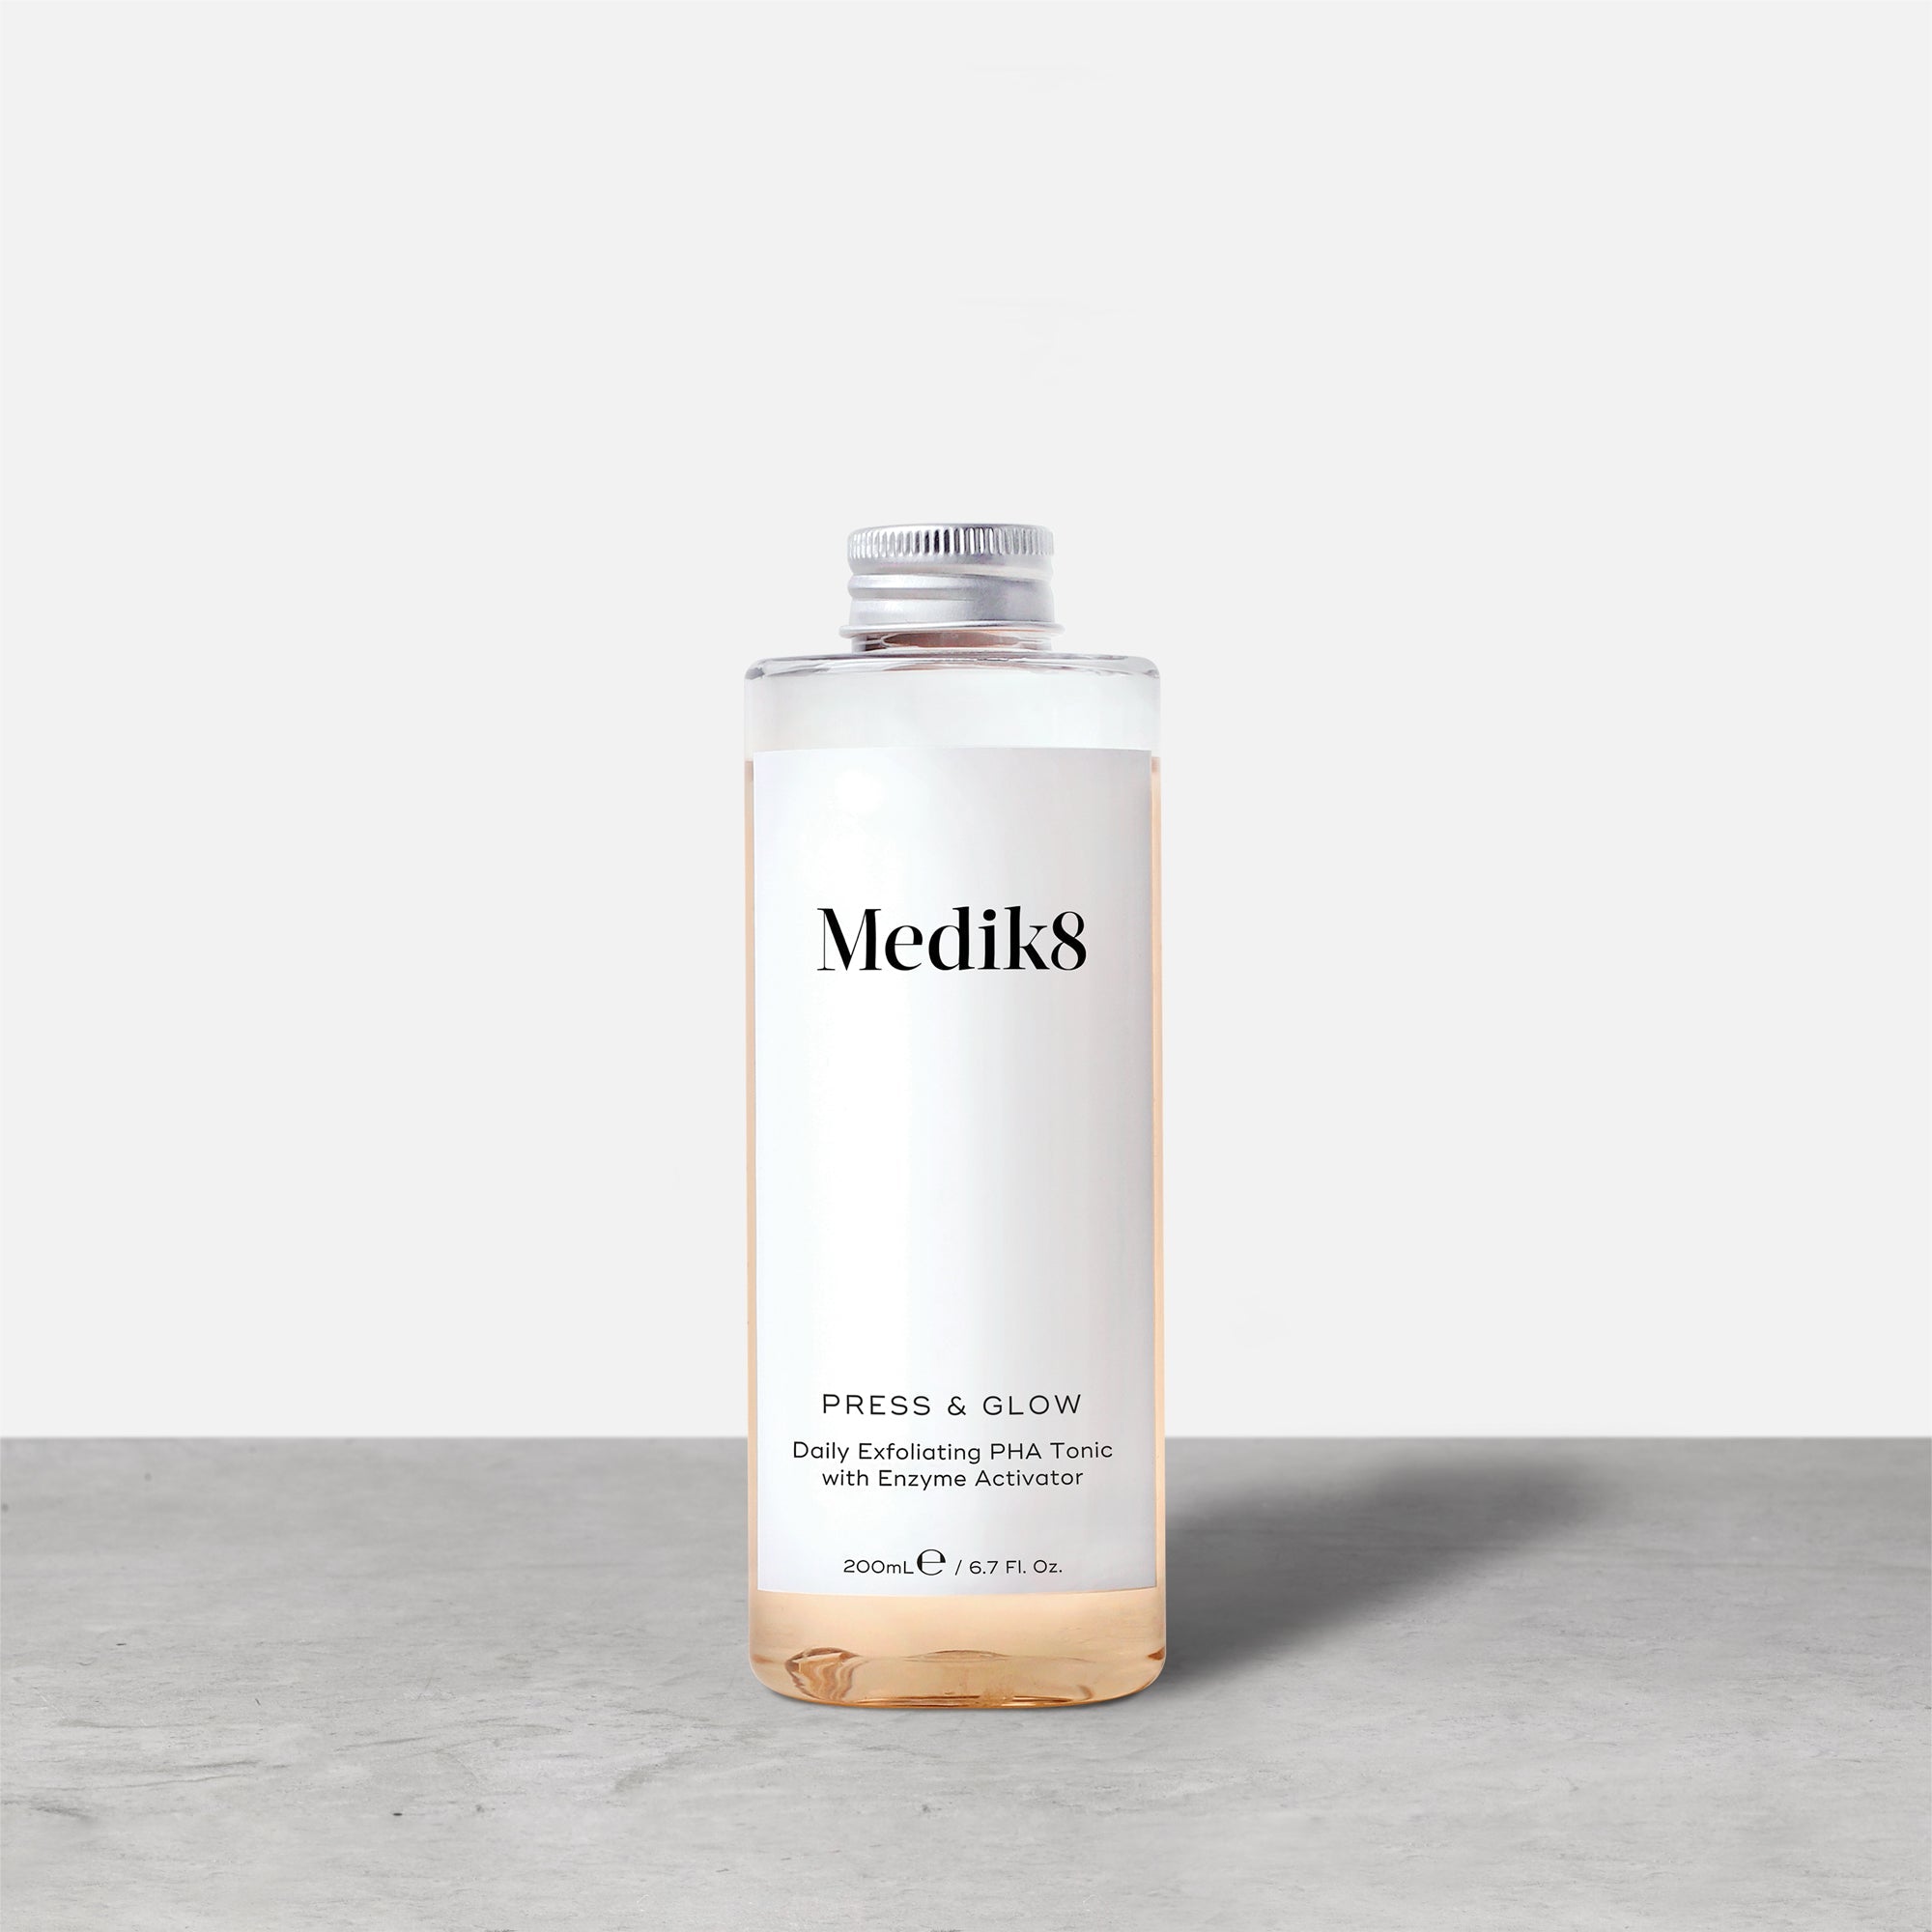 Press & Glow™ by Medik8. A Daily Exfoliating PHA Tonic with Enzyme Activator